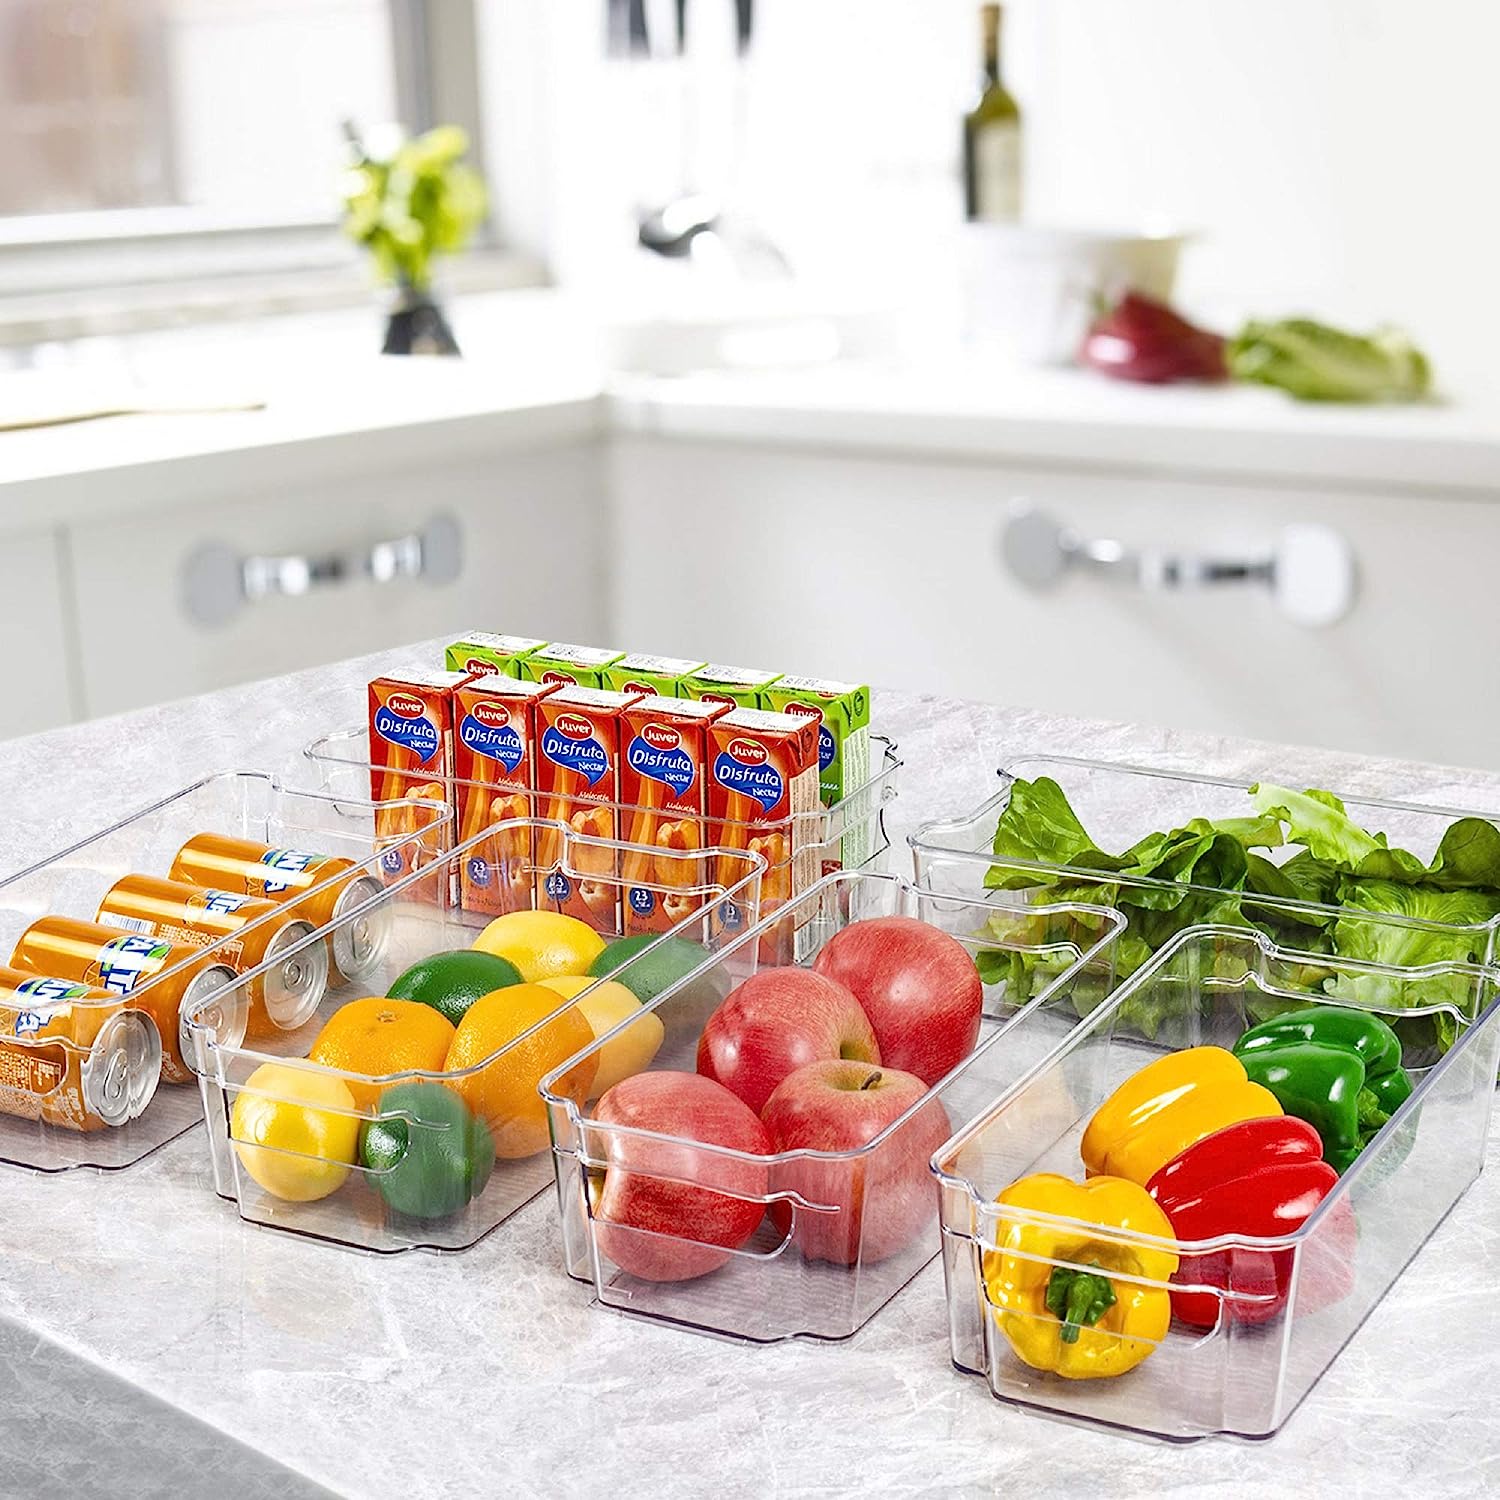  BINO, Plastic Bins, Large - 2 Pack, THE LUCID COLLECTION, Multi-Use, Built-In Handles, BPA-Free, Clear Storage Containers, Fridge  Organizer